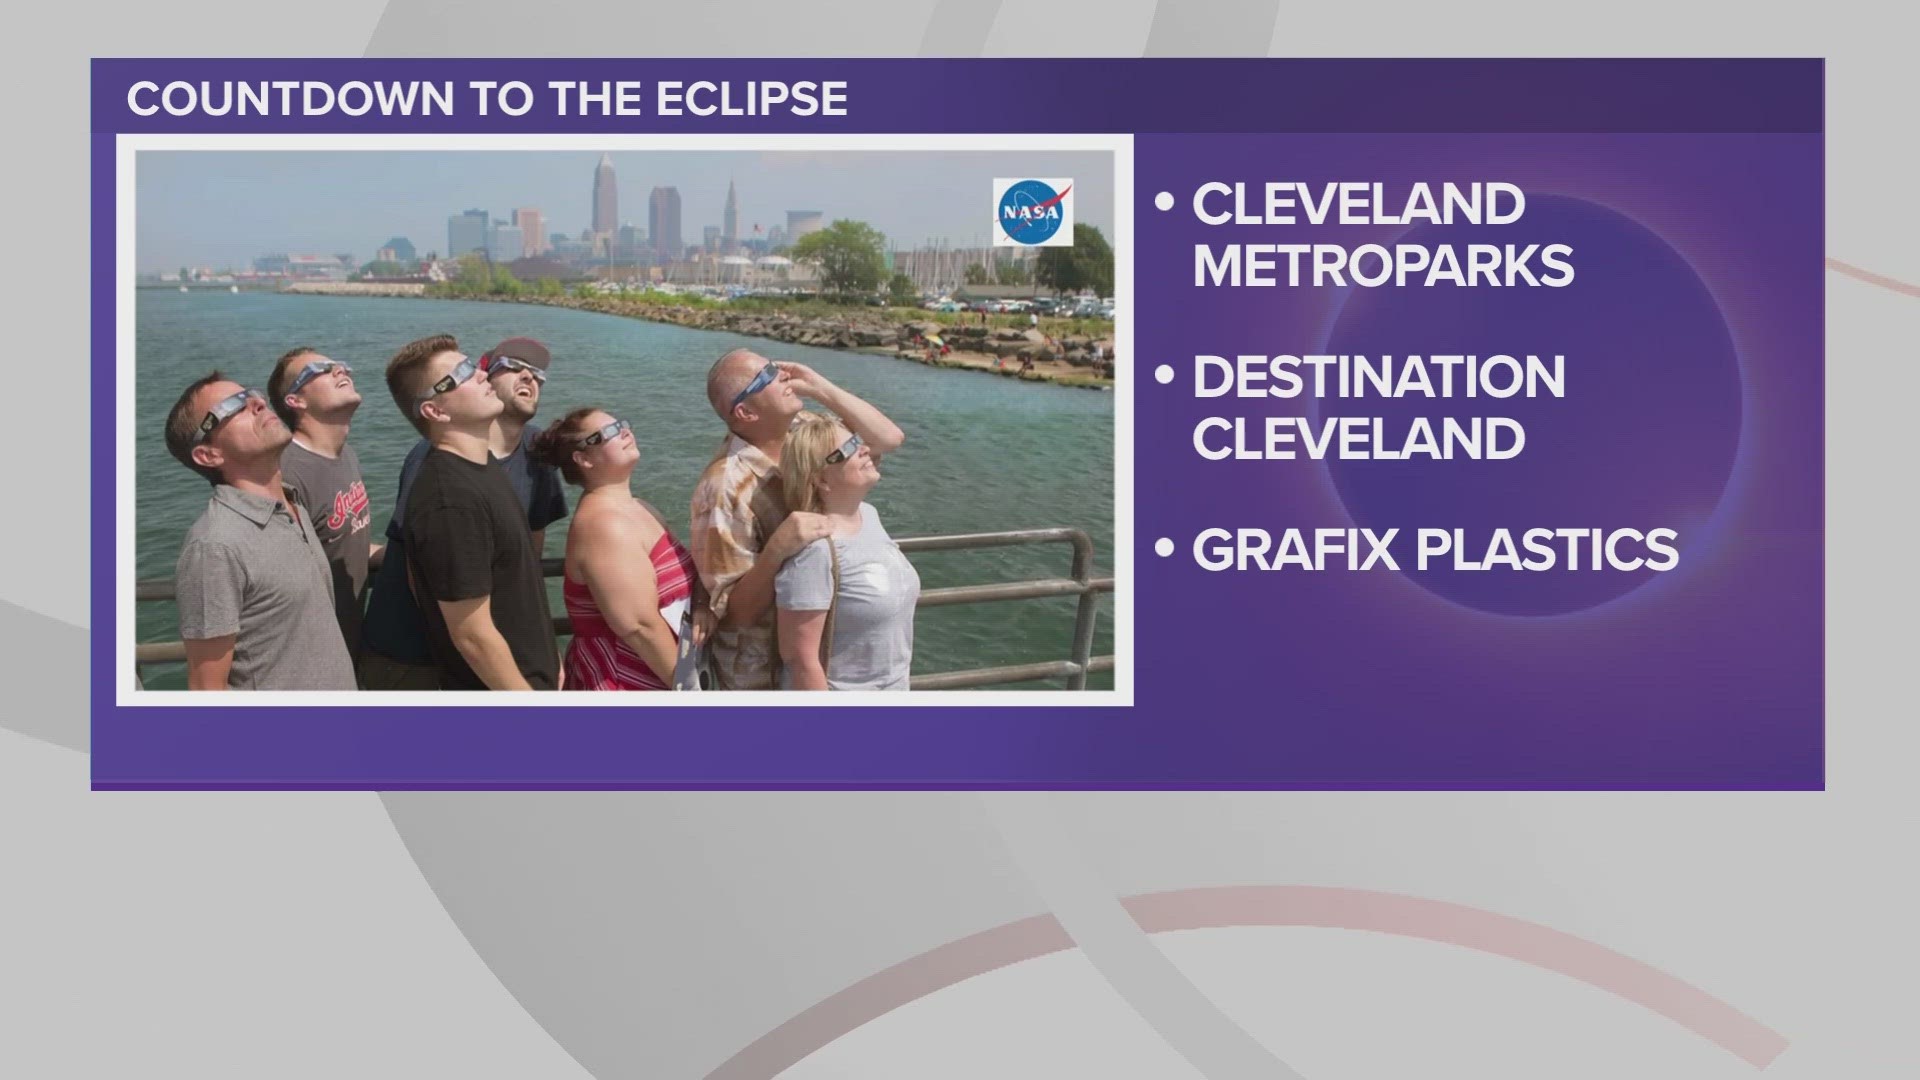 The April 8 solar eclipse puts Northeast Ohio in the path of totality.